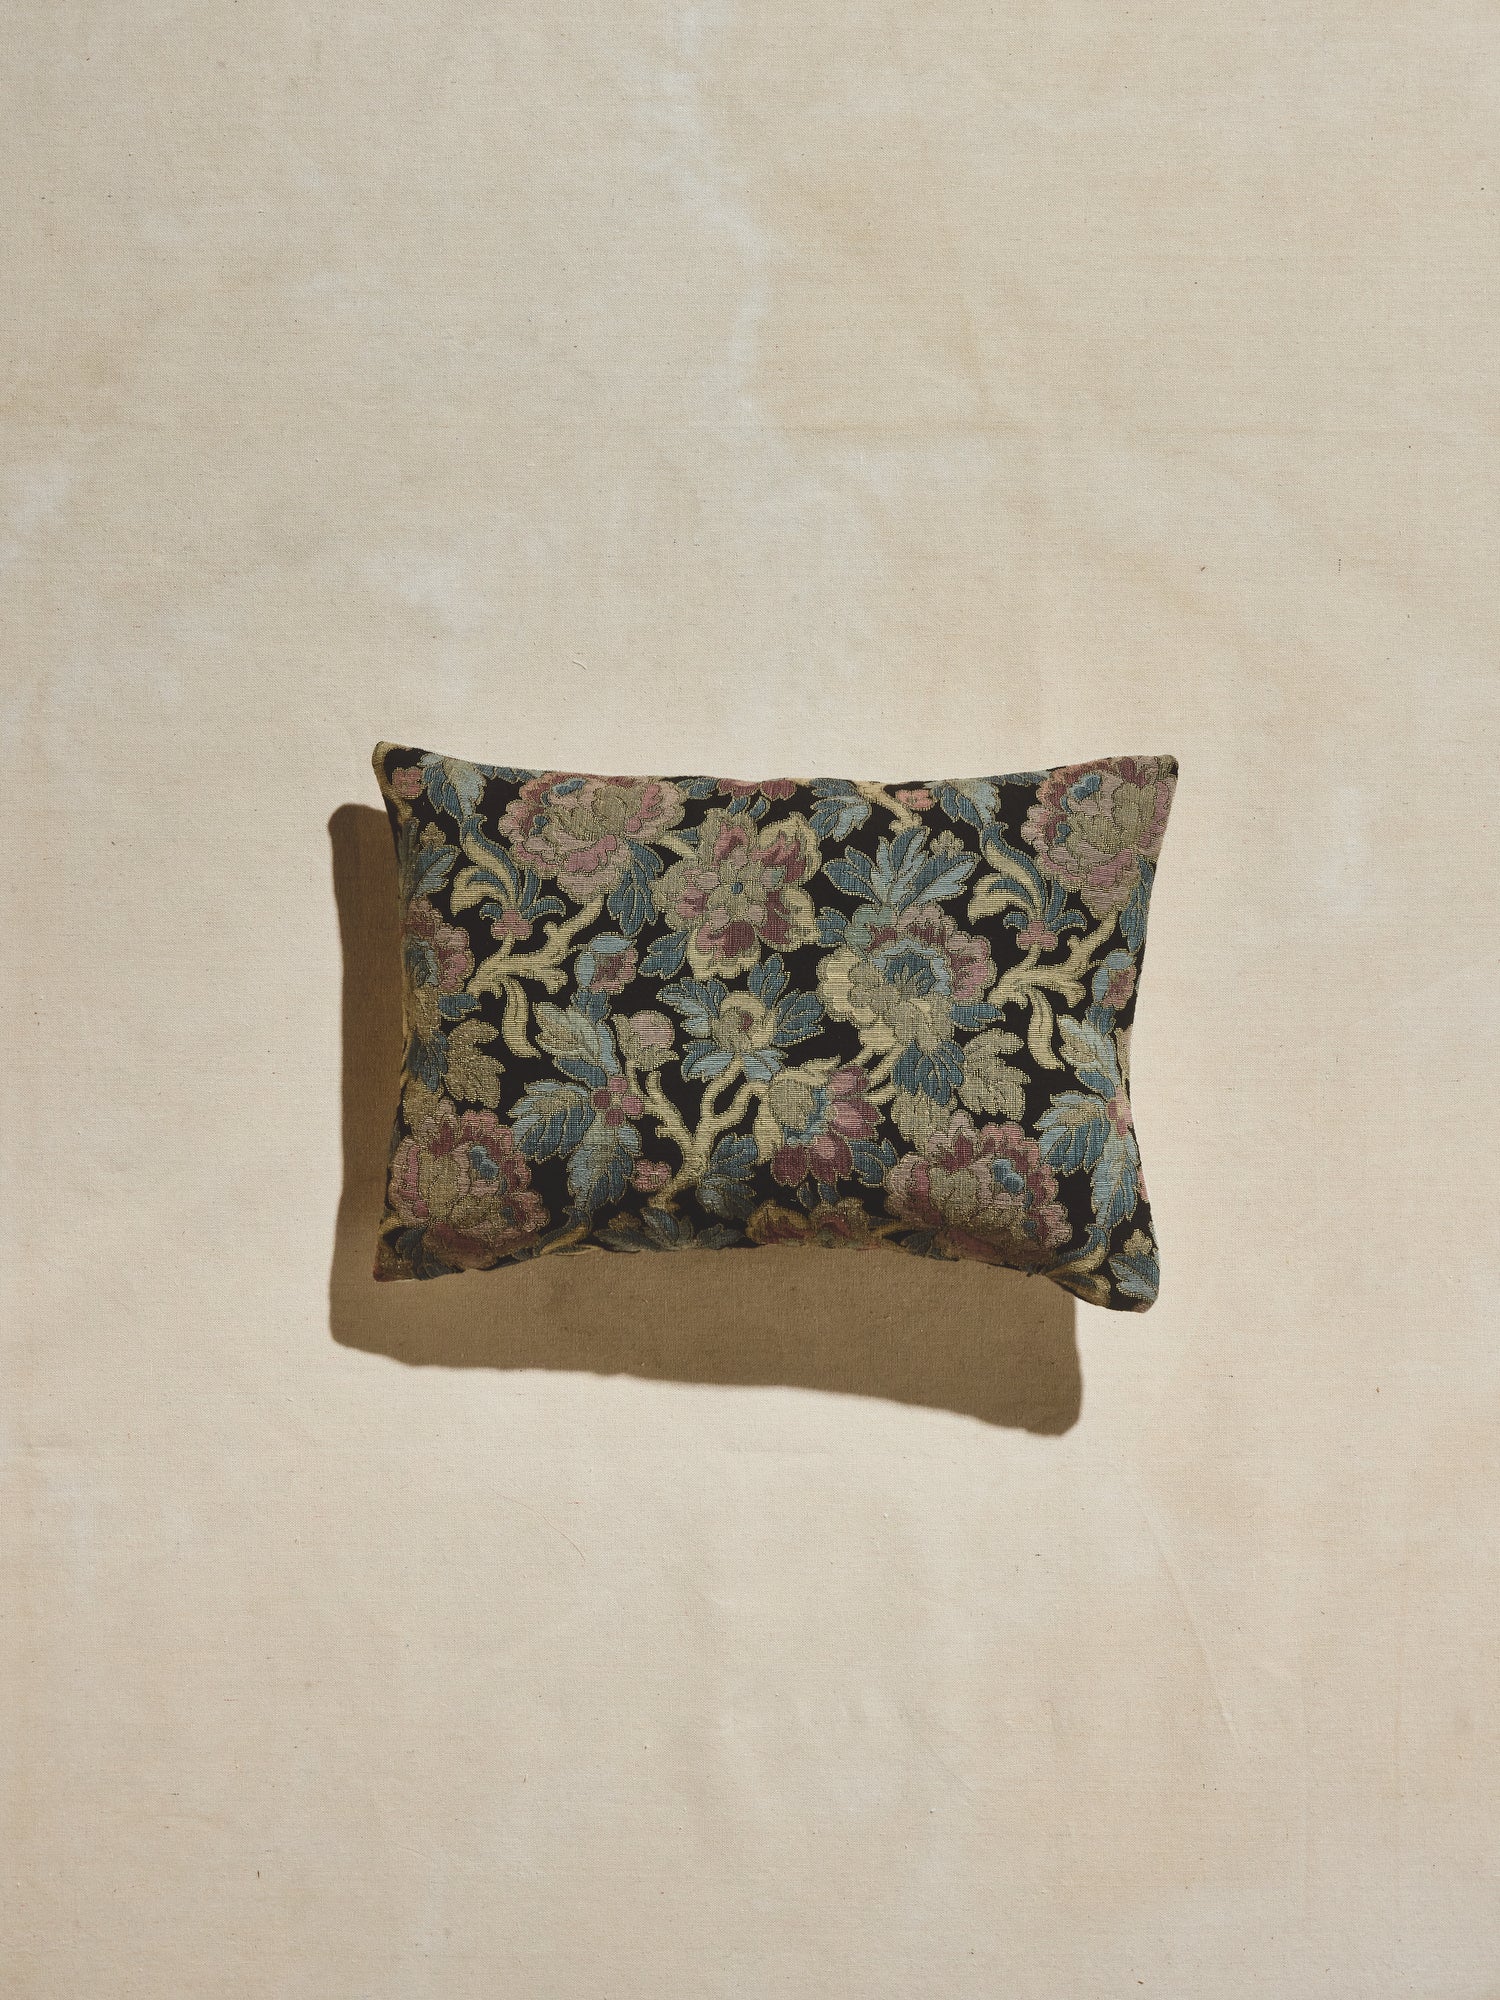 Nightshade woven floral pillow with cool tones of navy, light blue, gold, and pale pinks.